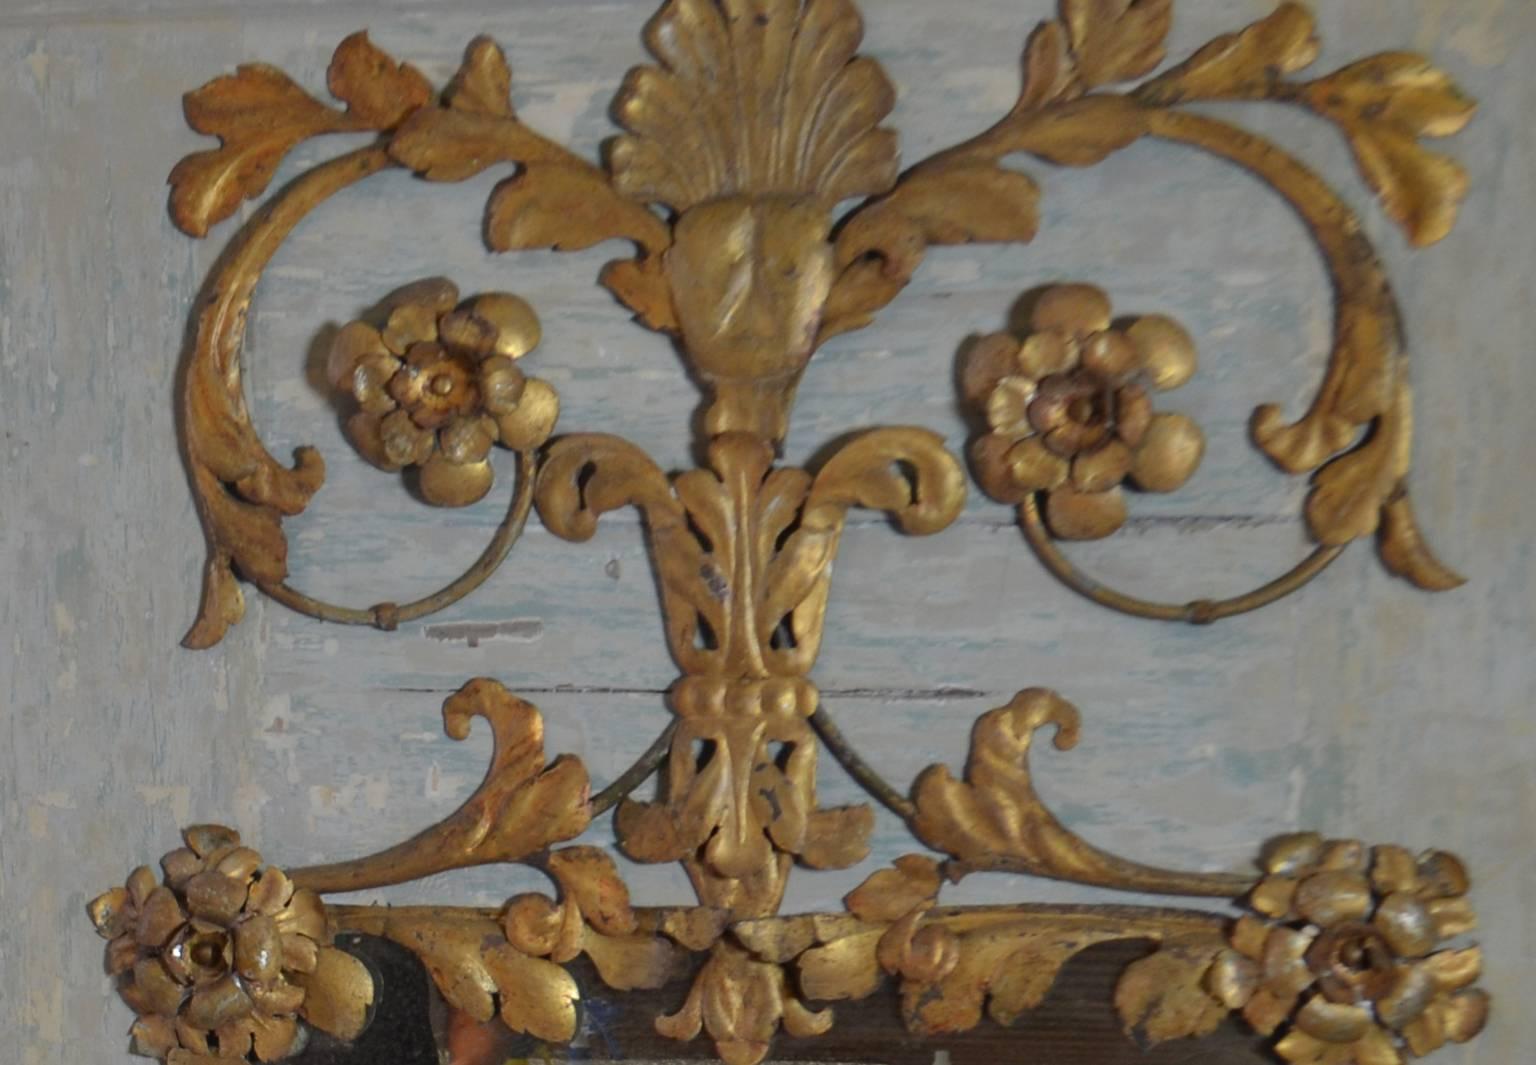 Gilt  Pair of Venetian Mirrors, Assembled with 18th century elements